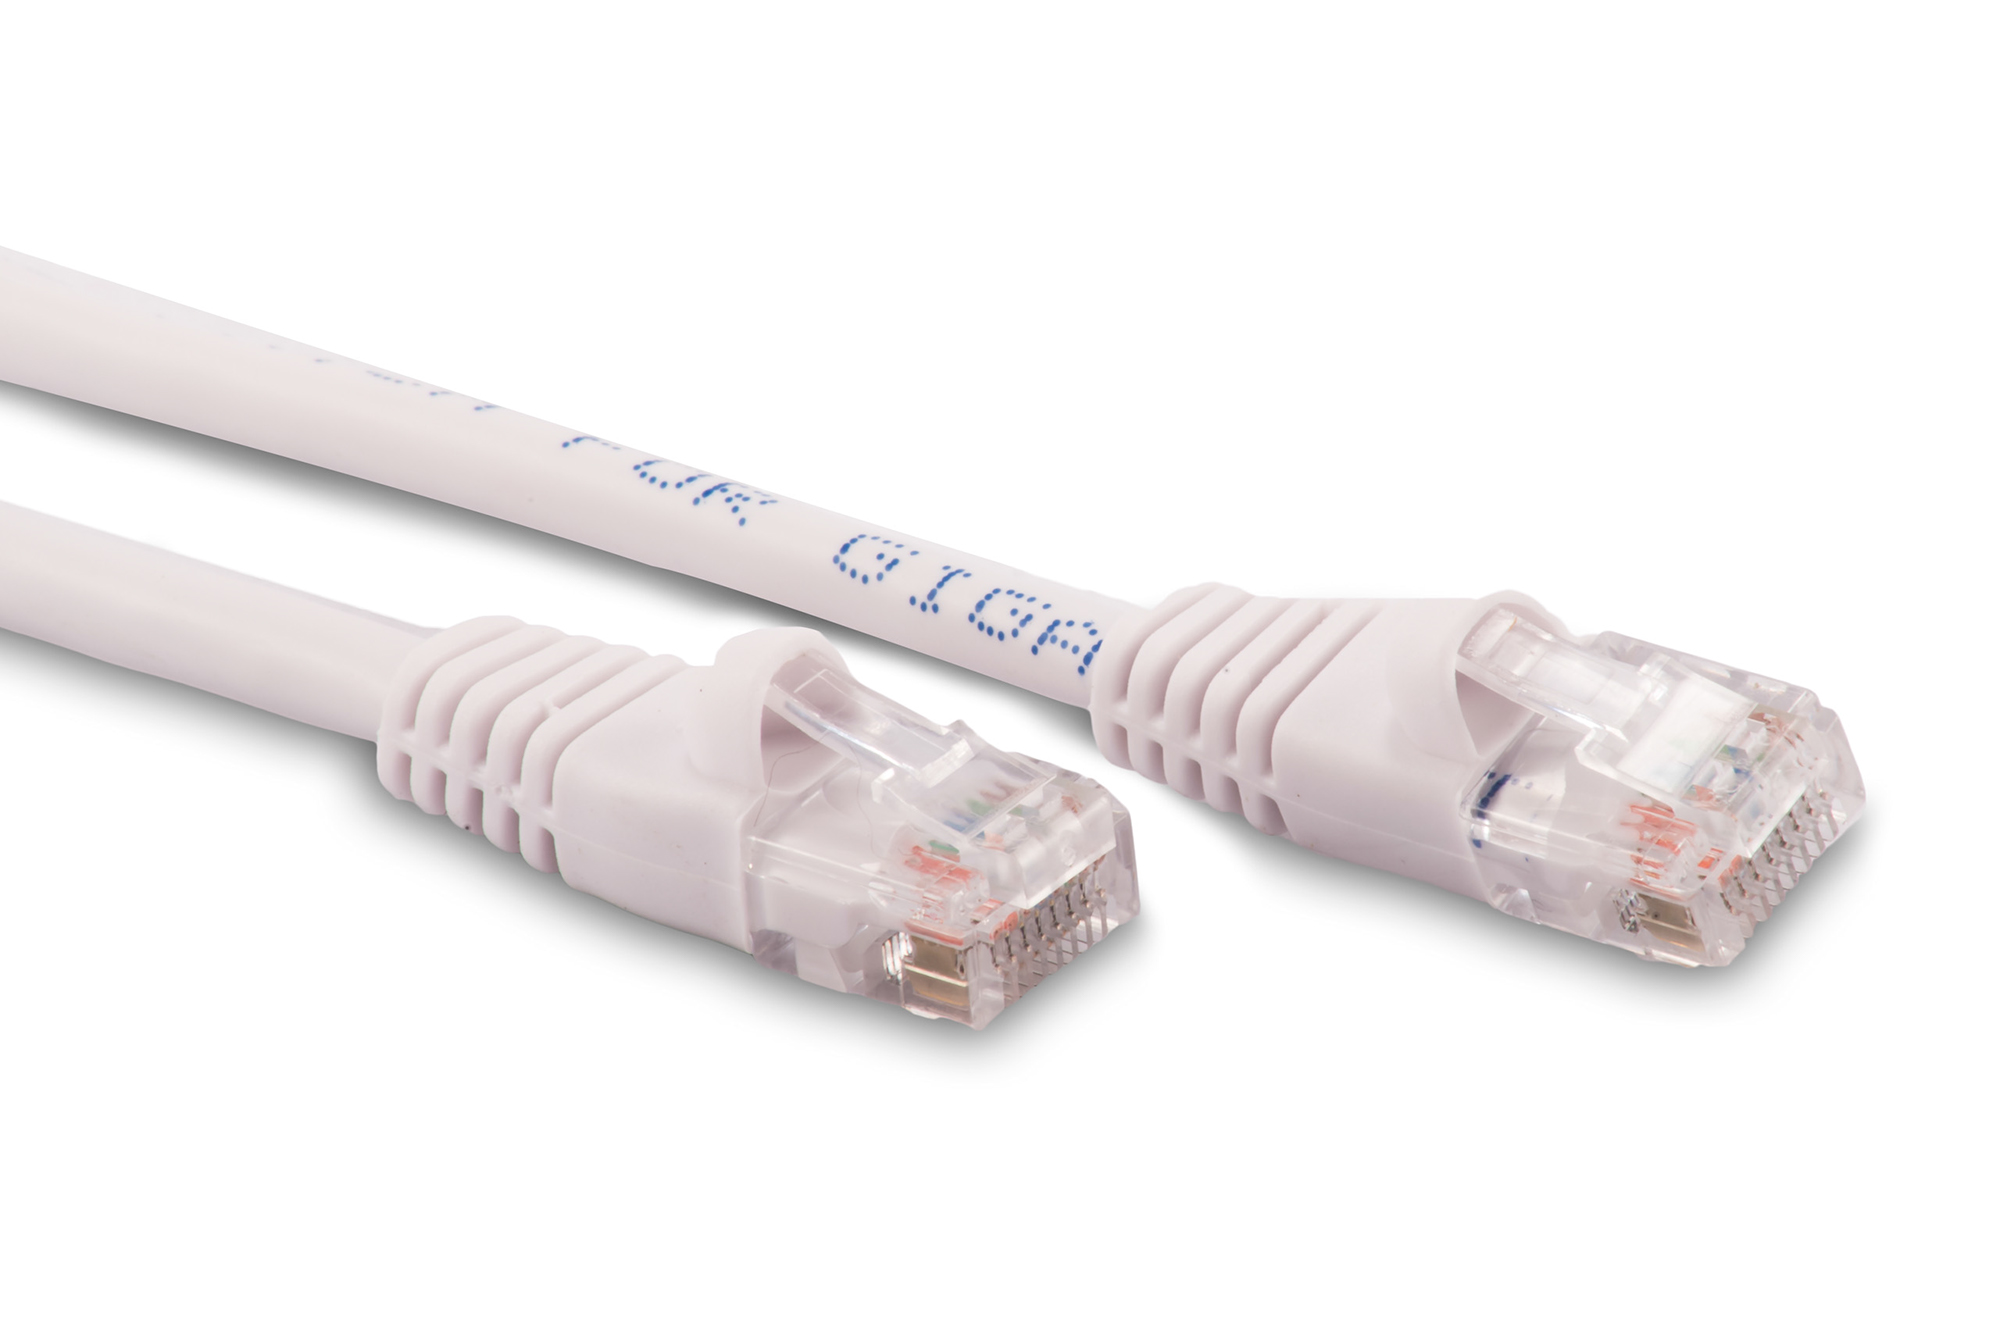 7ft Cat6 Ethernet Patch Cable - White Color - Snagless Boot, Stranded, RJ45, 550Mhz, 24AWG